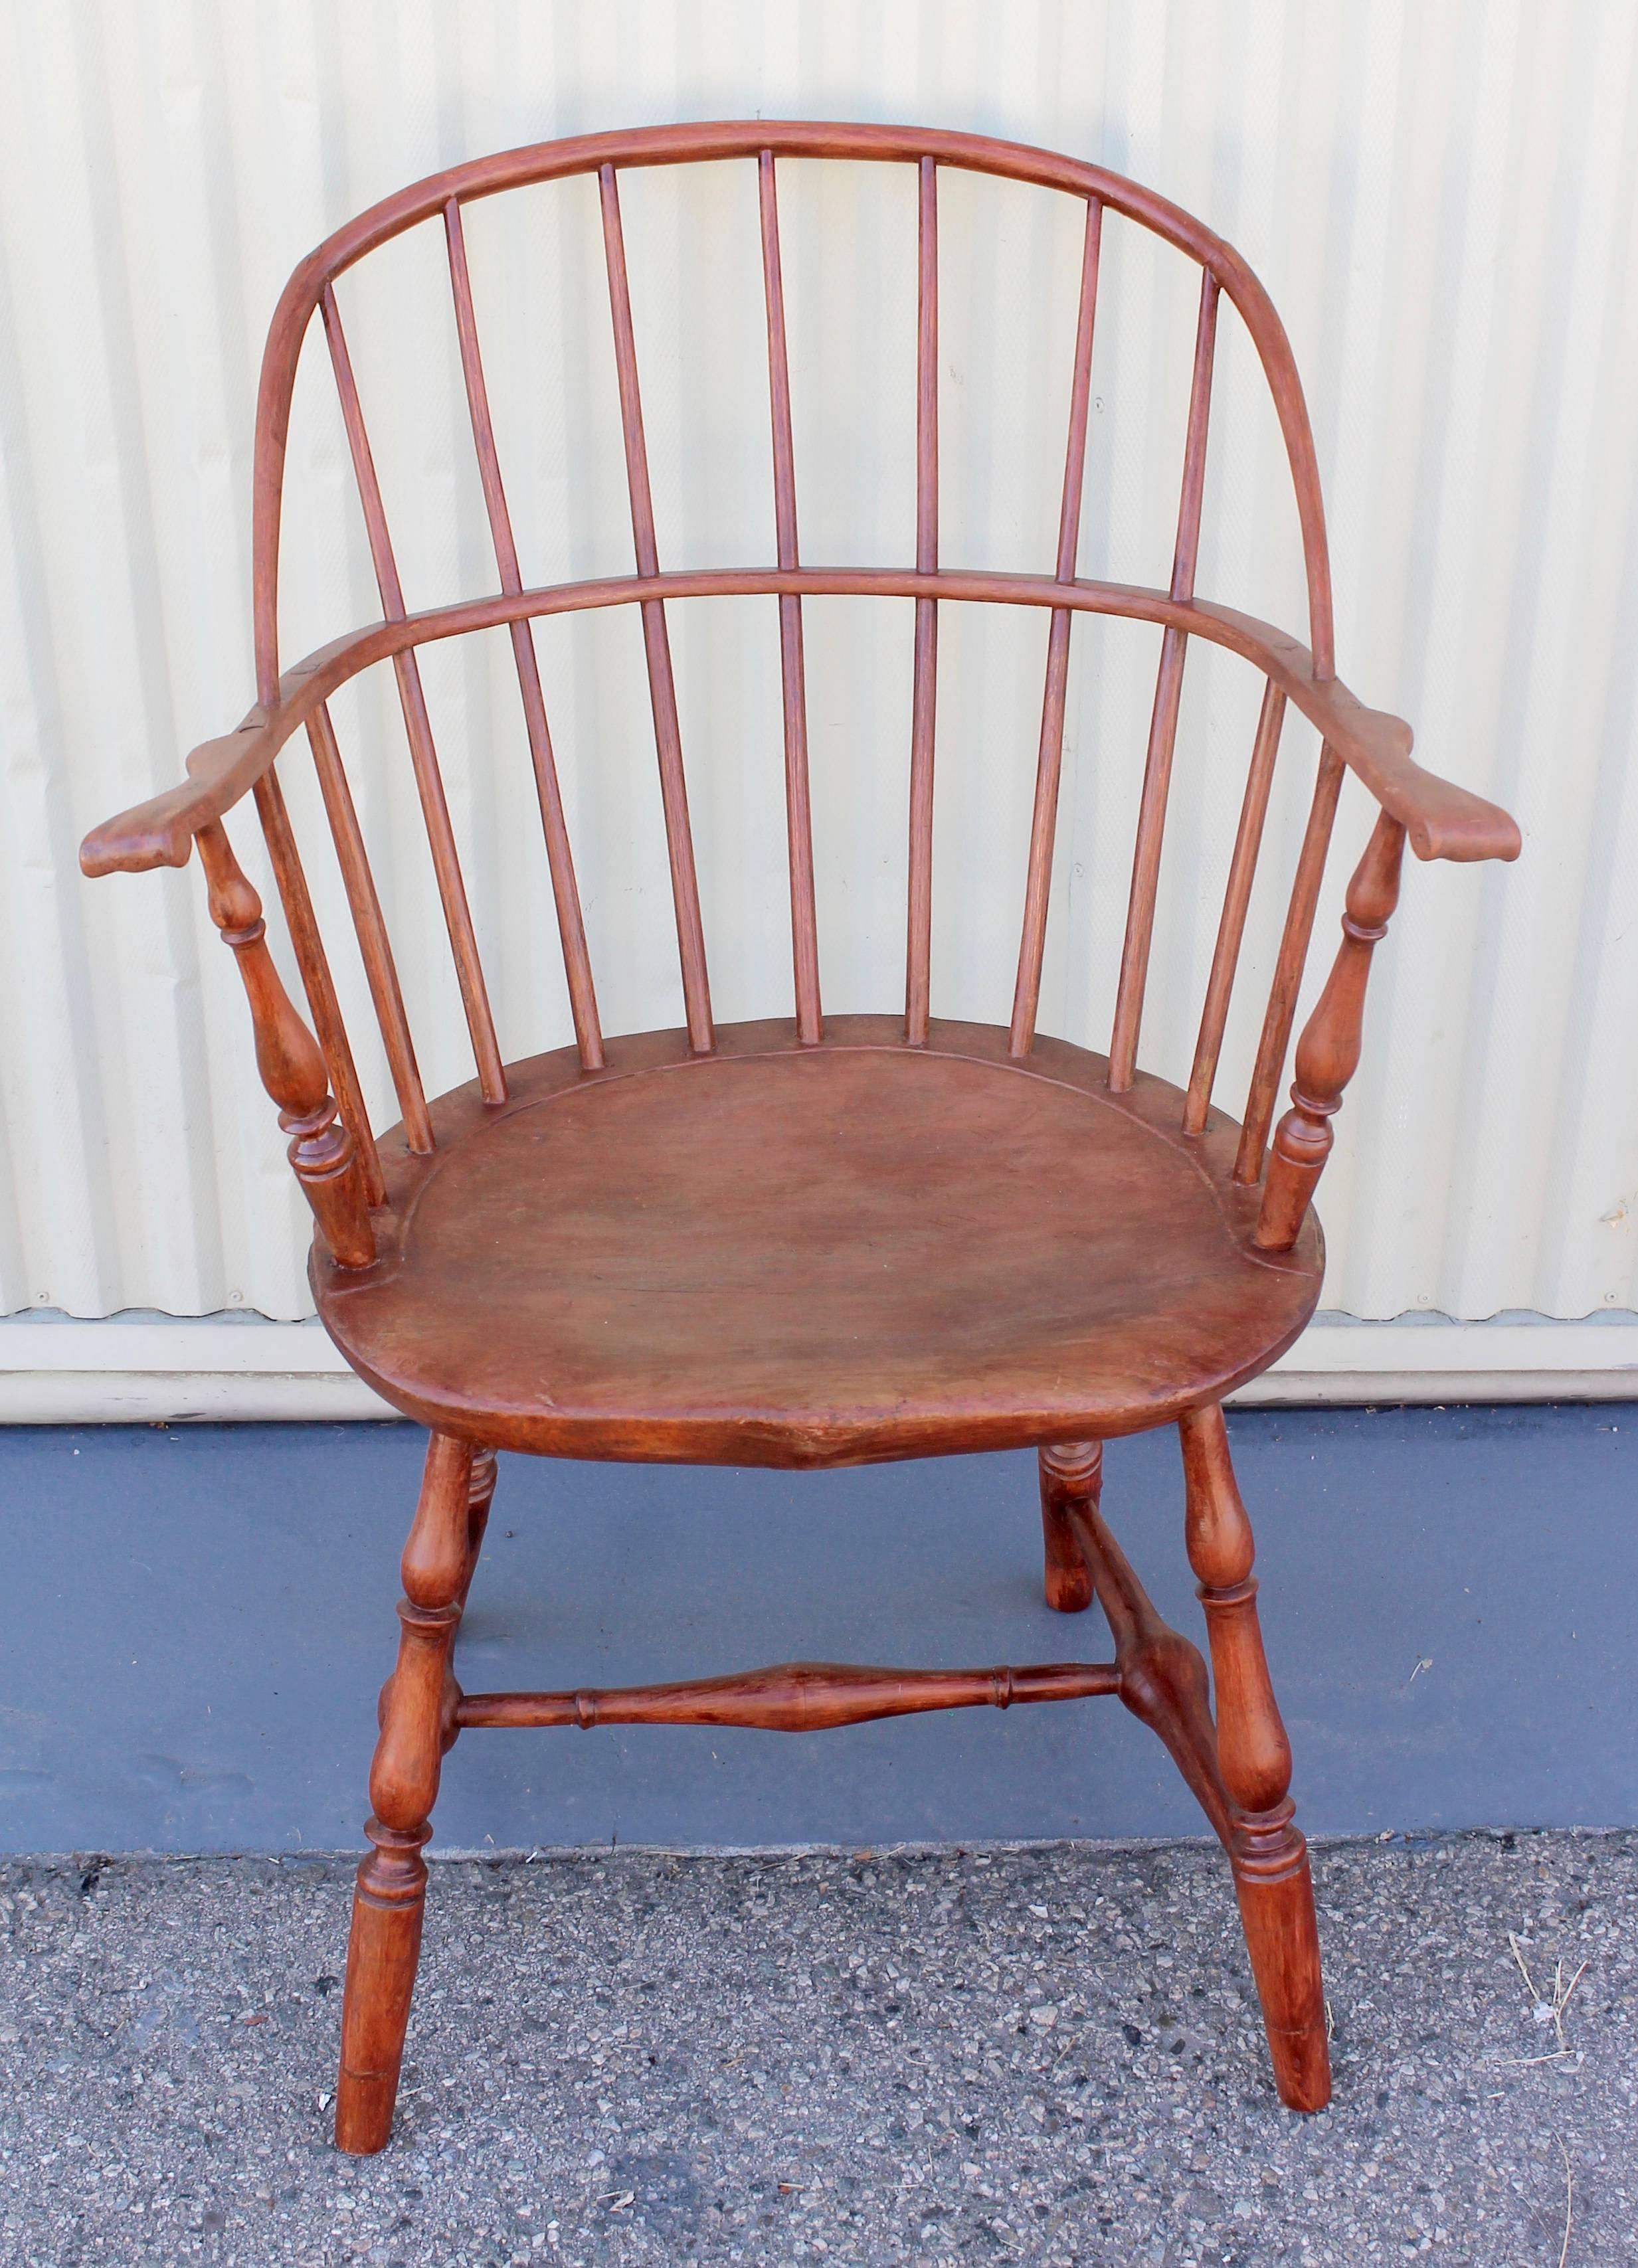 This fine American Windsor painted armchair is in great condition and has a wonderful worn painted surface. The patina is the very best.